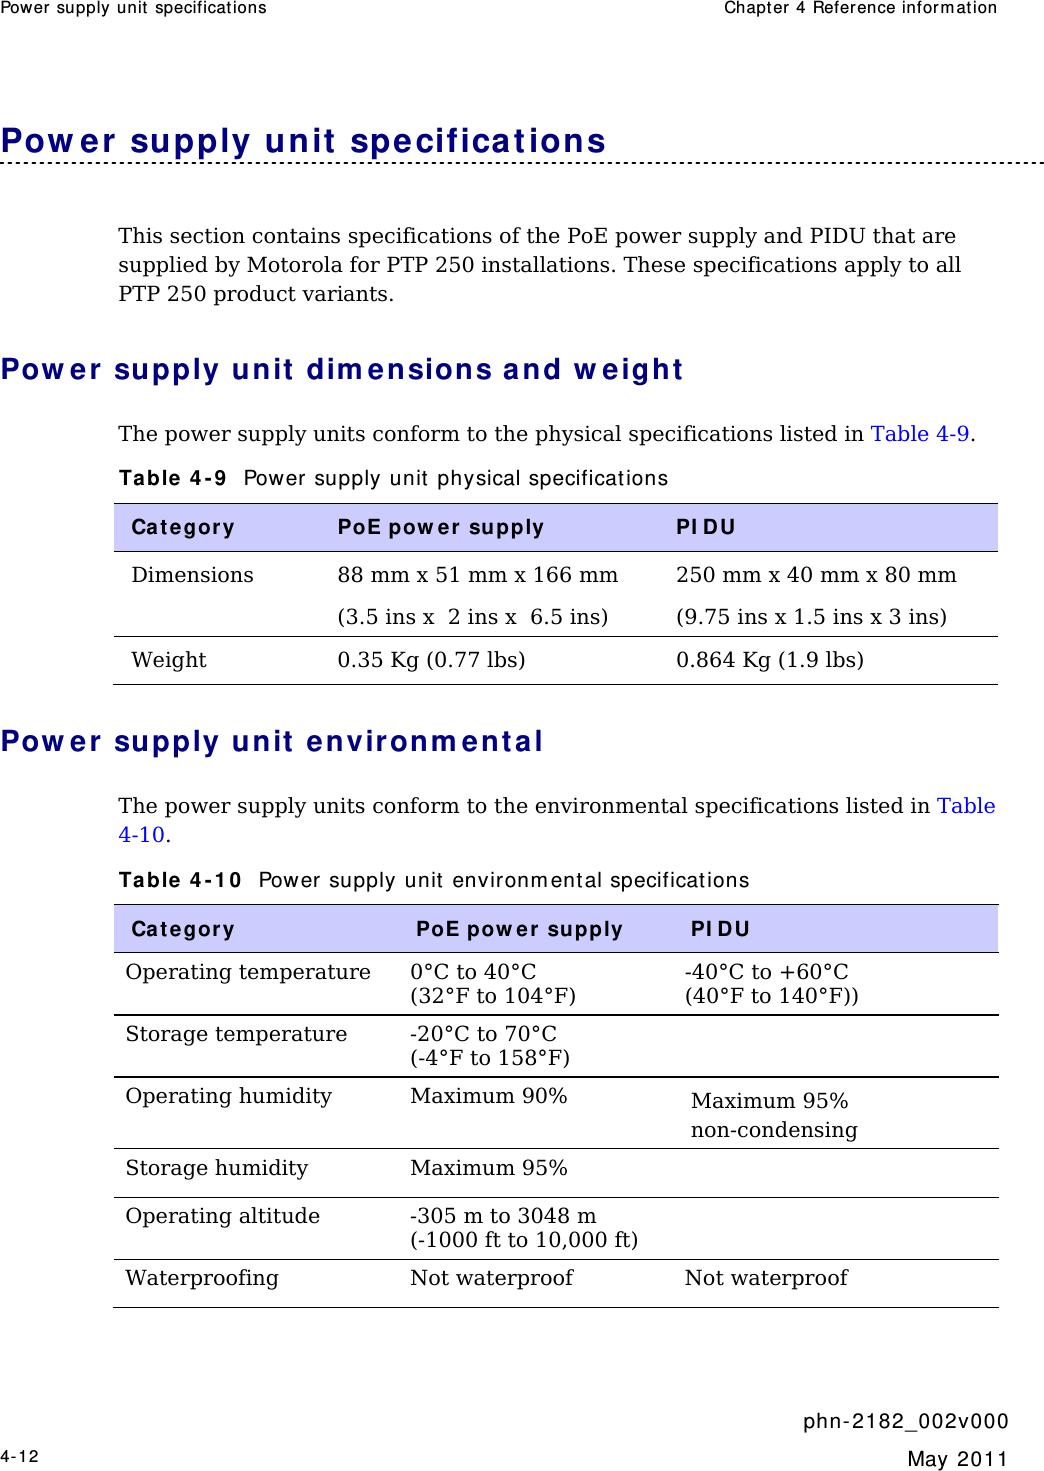 Power supply unit  specifications  Chapt er 4 Reference inform at ion     phn- 2 182_002v 000 4-12  May 2011  Pow er supply unit specificat ions This section contains specifications of the PoE power supply and PIDU that are supplied by Motorola for PTP 250 installations. These specifications apply to all PTP 250 product variants. Pow e r  supply unit  dim ensions and w eight  The power supply units conform to the physical specifications listed in Table 4-9. Table  4 - 9   Power supply unit physical specifications Cat e gor y  PoE pow er  supply  PI DU Dimensions  88 mm x 51 mm x 166 mm (3.5 ins x  2 ins x  6.5 ins) 250 mm x 40 mm x 80 mm  (9.75 ins x 1.5 ins x 3 ins) Weight   0.35 Kg (0.77 lbs)  0.864 Kg (1.9 lbs) Pow e r  supply unit  environm ent al The power supply units conform to the environmental specifications listed in Table 4-10. Table  4 - 1 0   Power supply unit environm ental specifications Cat e gor y  PoE pow e r supply  PI DU Operating temperature  0°C to 40°C  (32°F to 104°F) -40°C to +60°C (40°F to 140°F)) Storage temperature  -20°C to 70°C  (-4°F to 158°F)  Operating humidity  Maximum 90%  Maximum 95%  non-condensing Storage humidity  Maximum 95%   Operating altitude  -305 m to 3048 m  (-1000 ft to 10,000 ft)   Waterproofing  Not waterproof  Not waterproof  